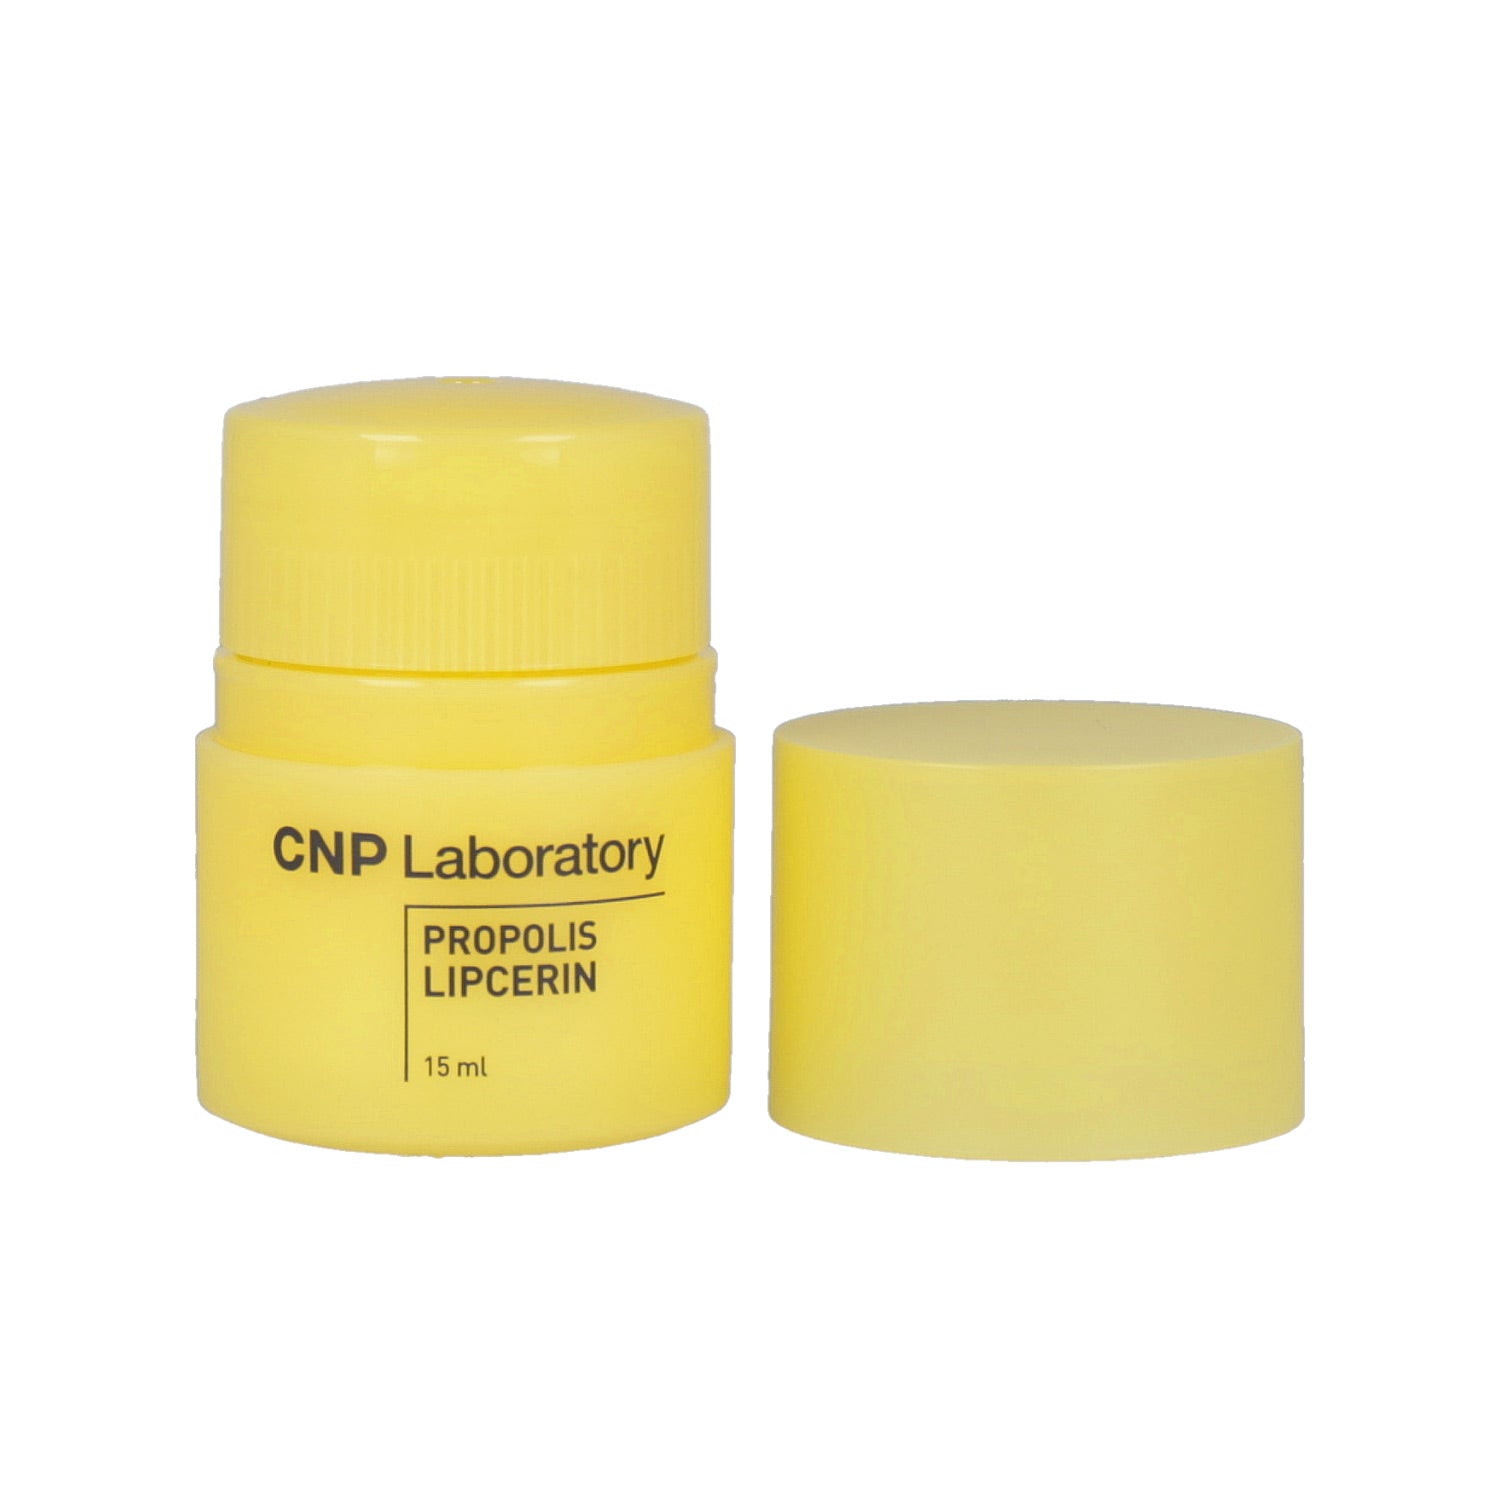 Hydrate and protect your lips with CNP Laboratory Propolis Lipcerin 15ml, a lip care product formulated with nourishing propolis extract.